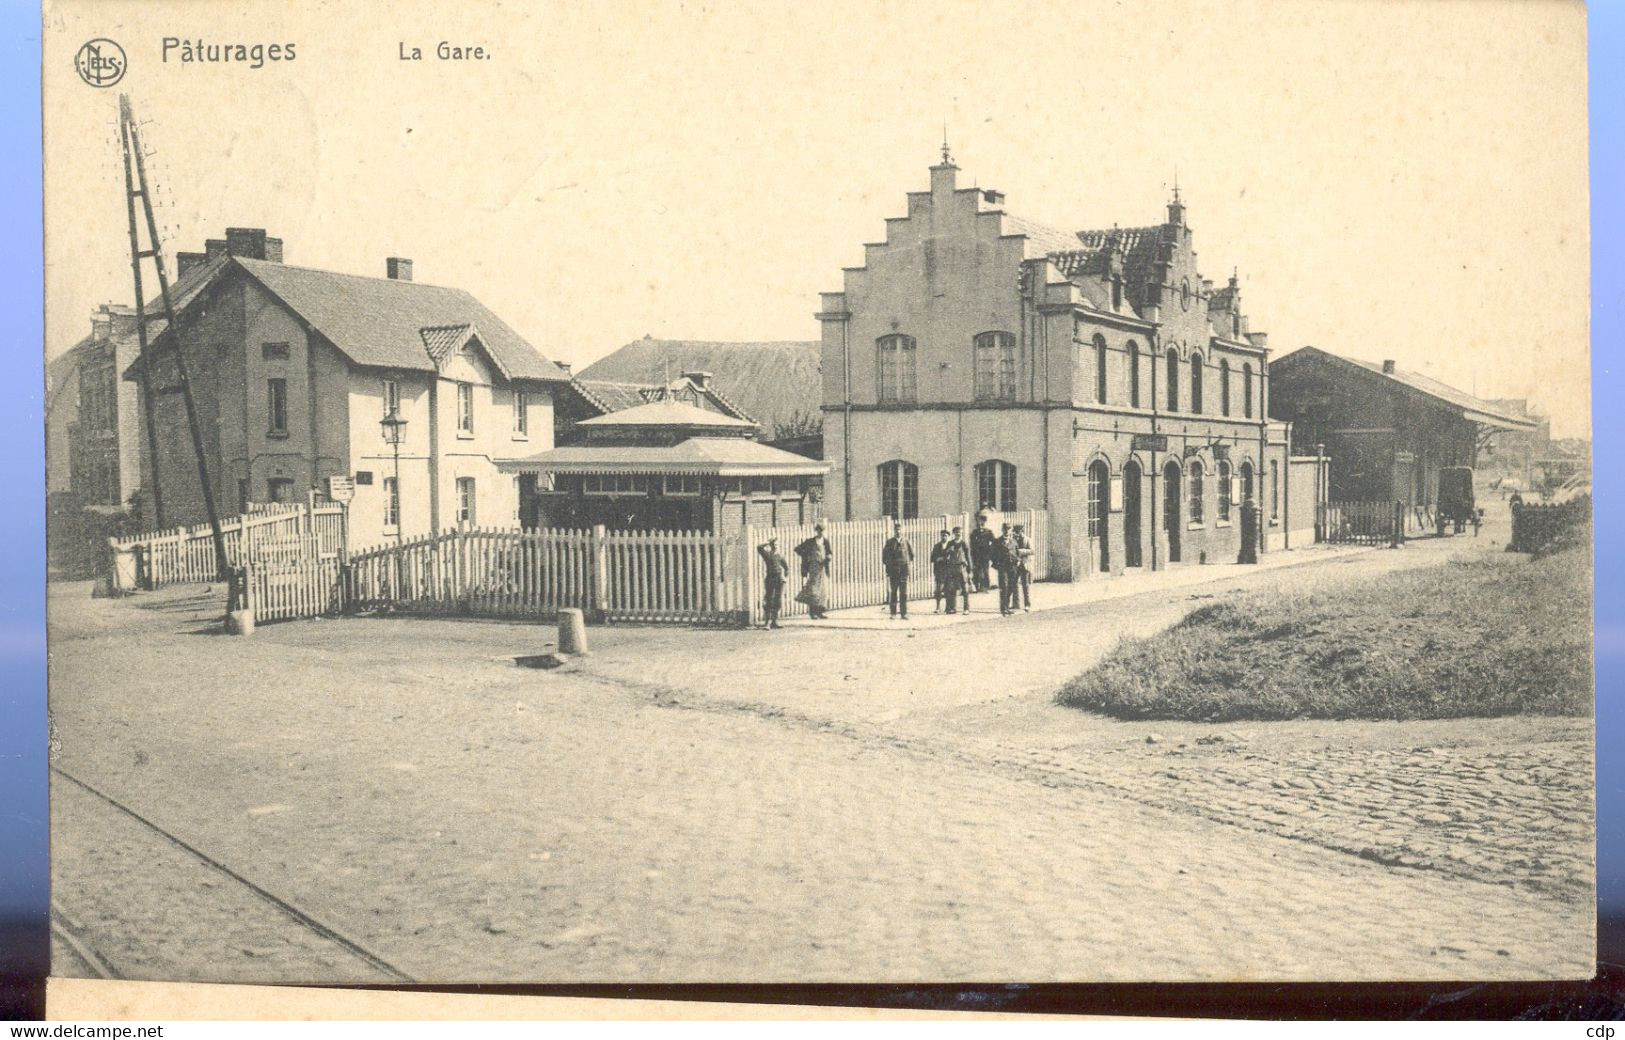 Cpa Paturages  Gare  1913 - Colfontaine